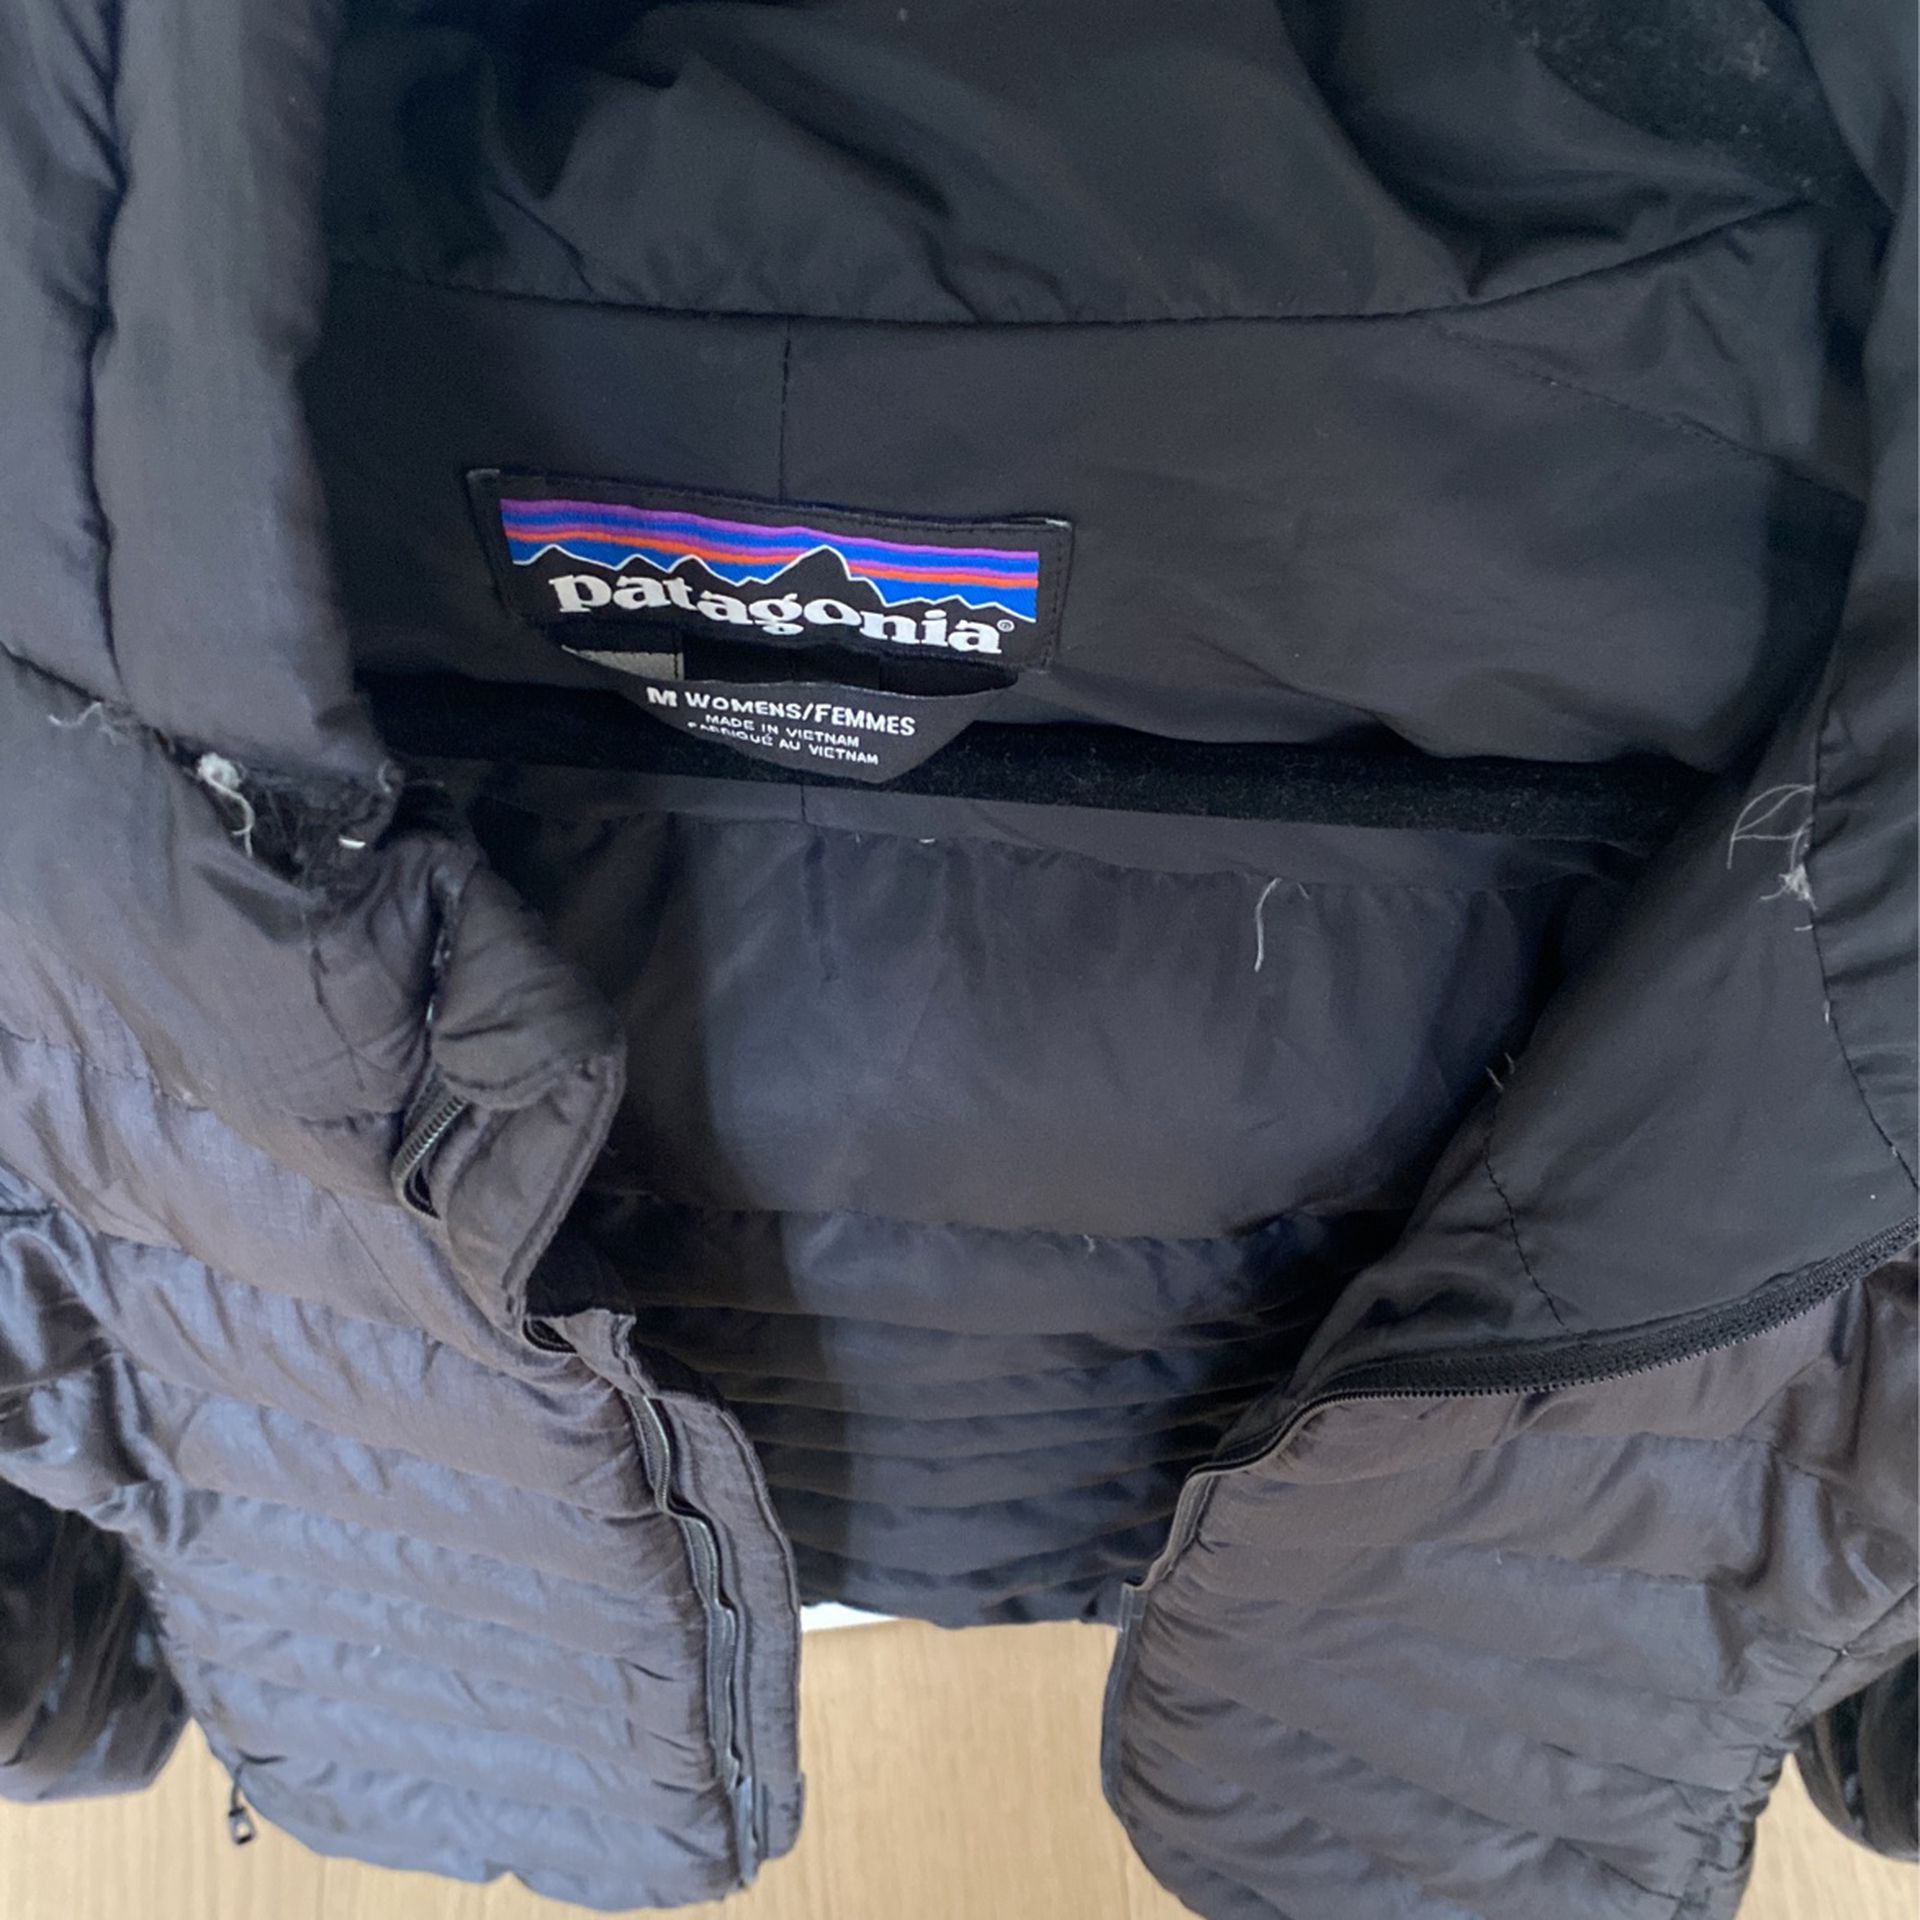 Black M Womens Patagonia Jacket for Sale in San Francisco, CA - OfferUp